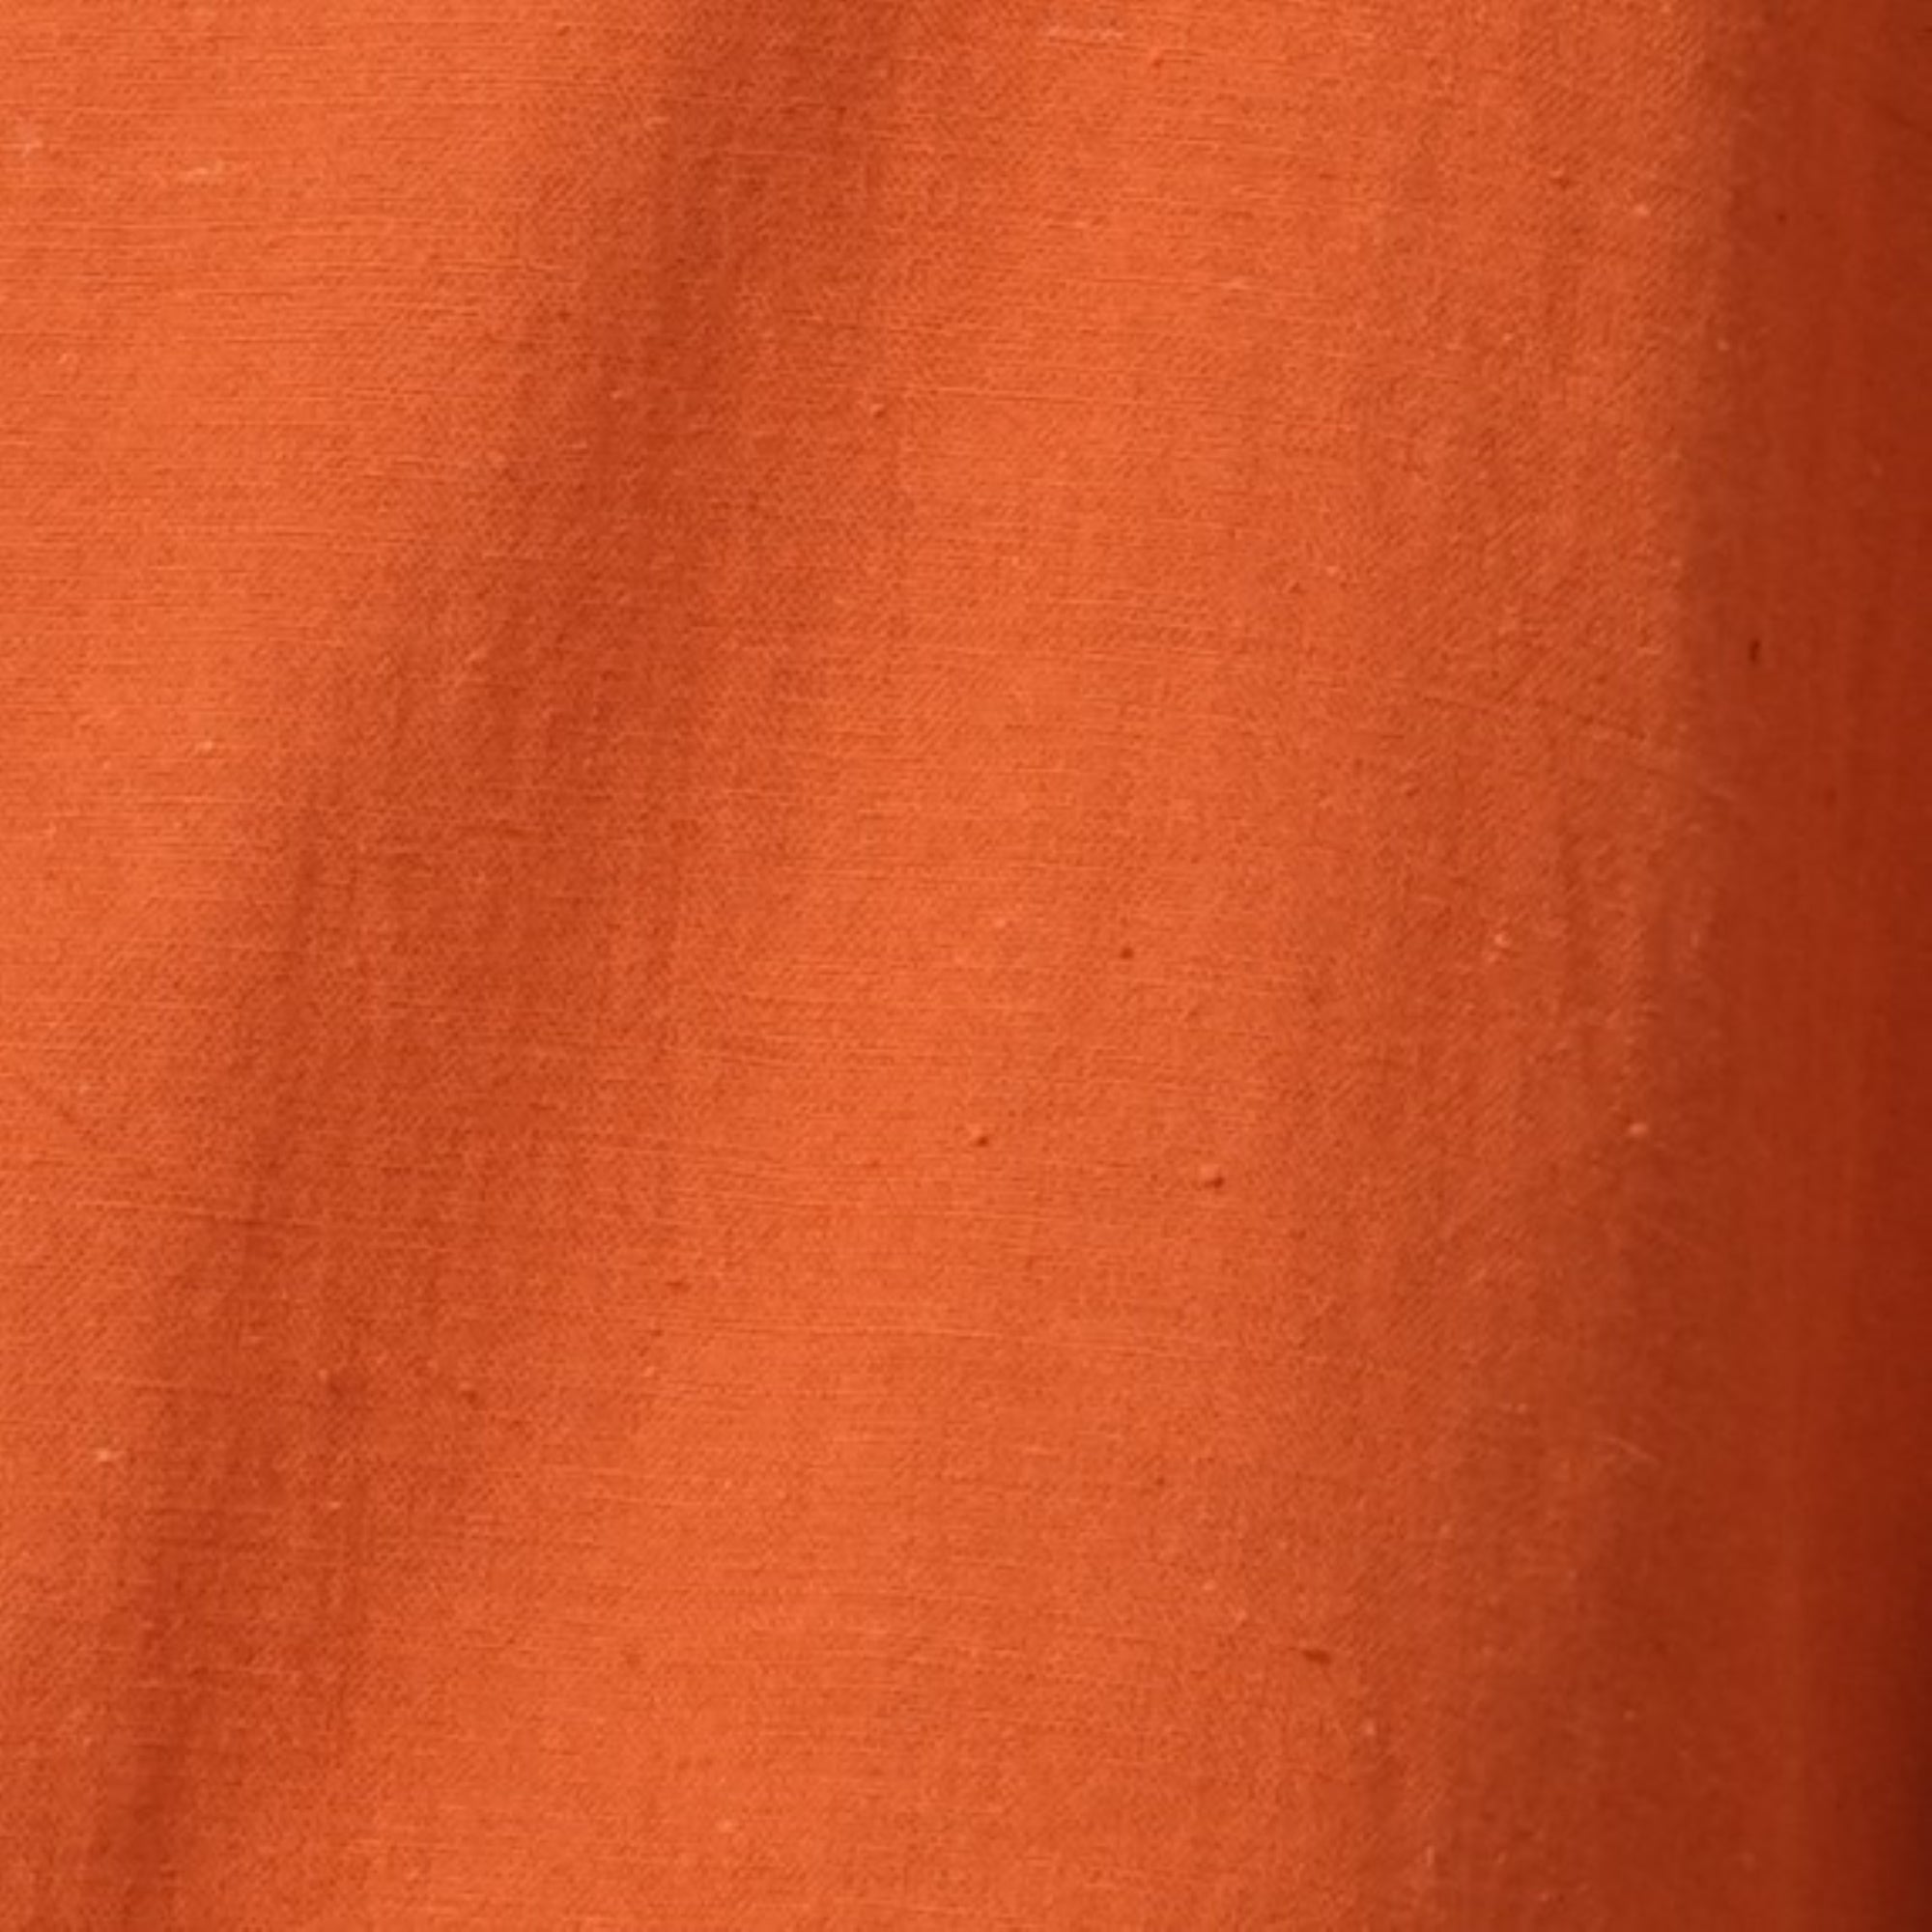 Long Shirt - Autumn Rust With Contrast Edging - Limited Edition